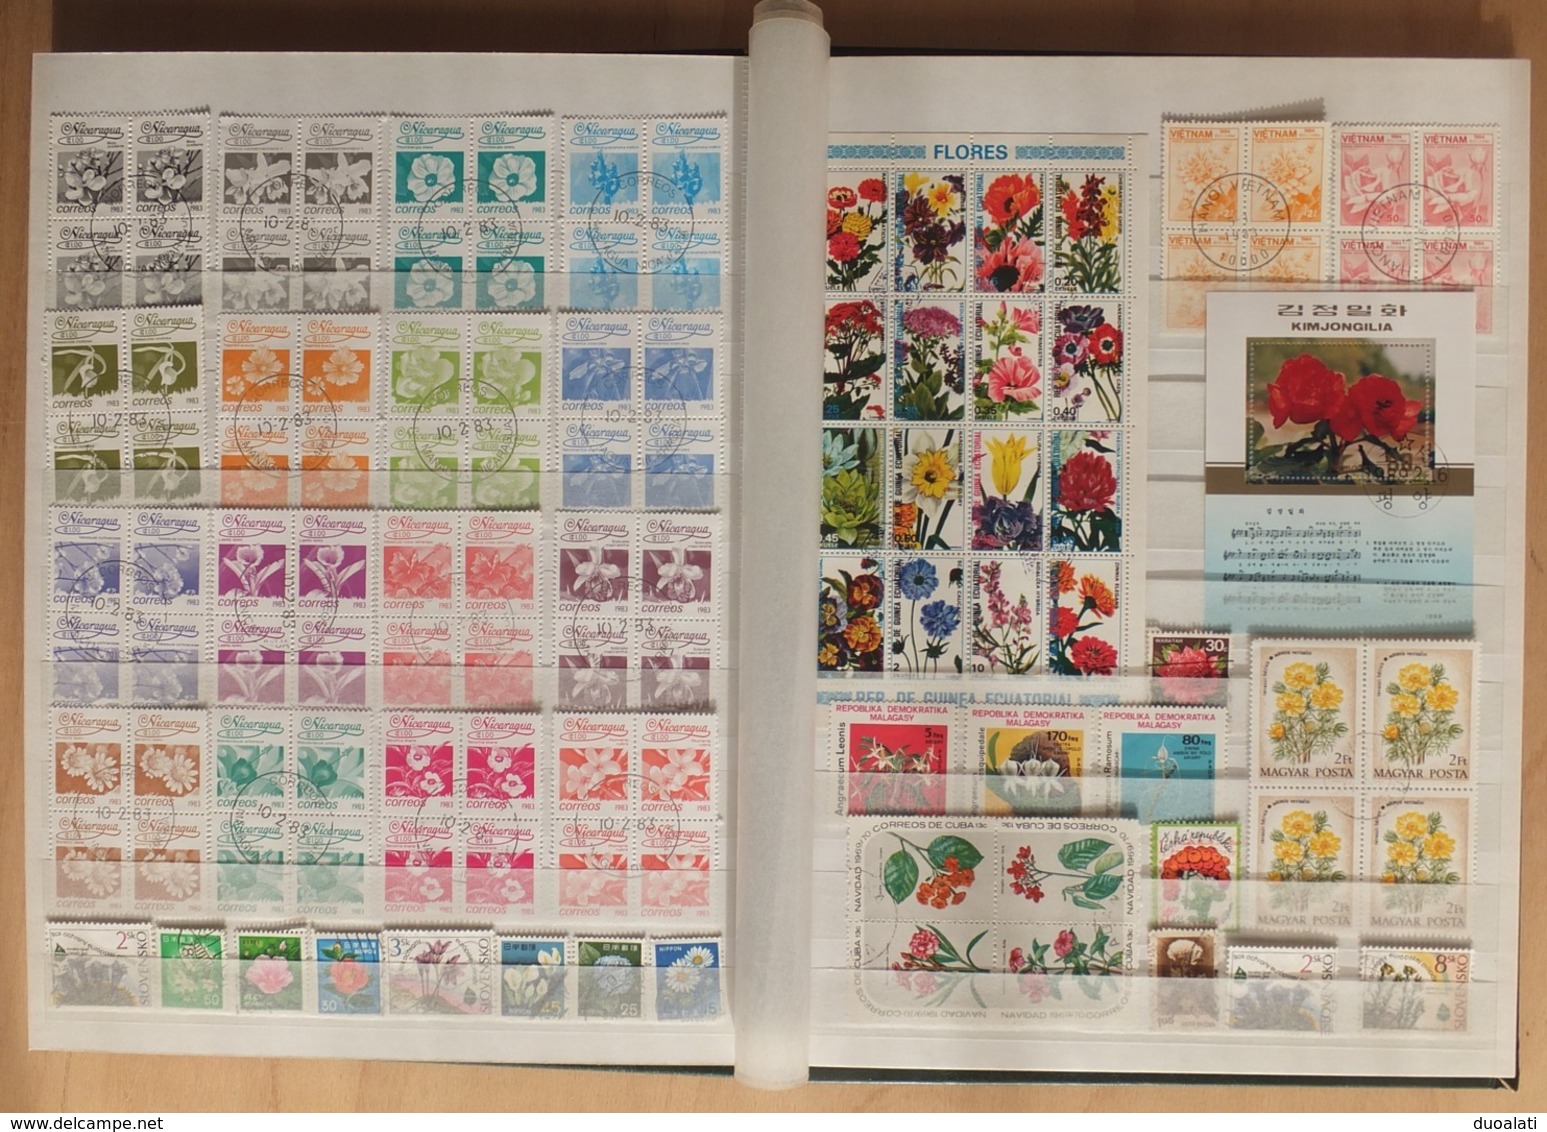 Collection of stamps on topic Plants Flowers Roses with album